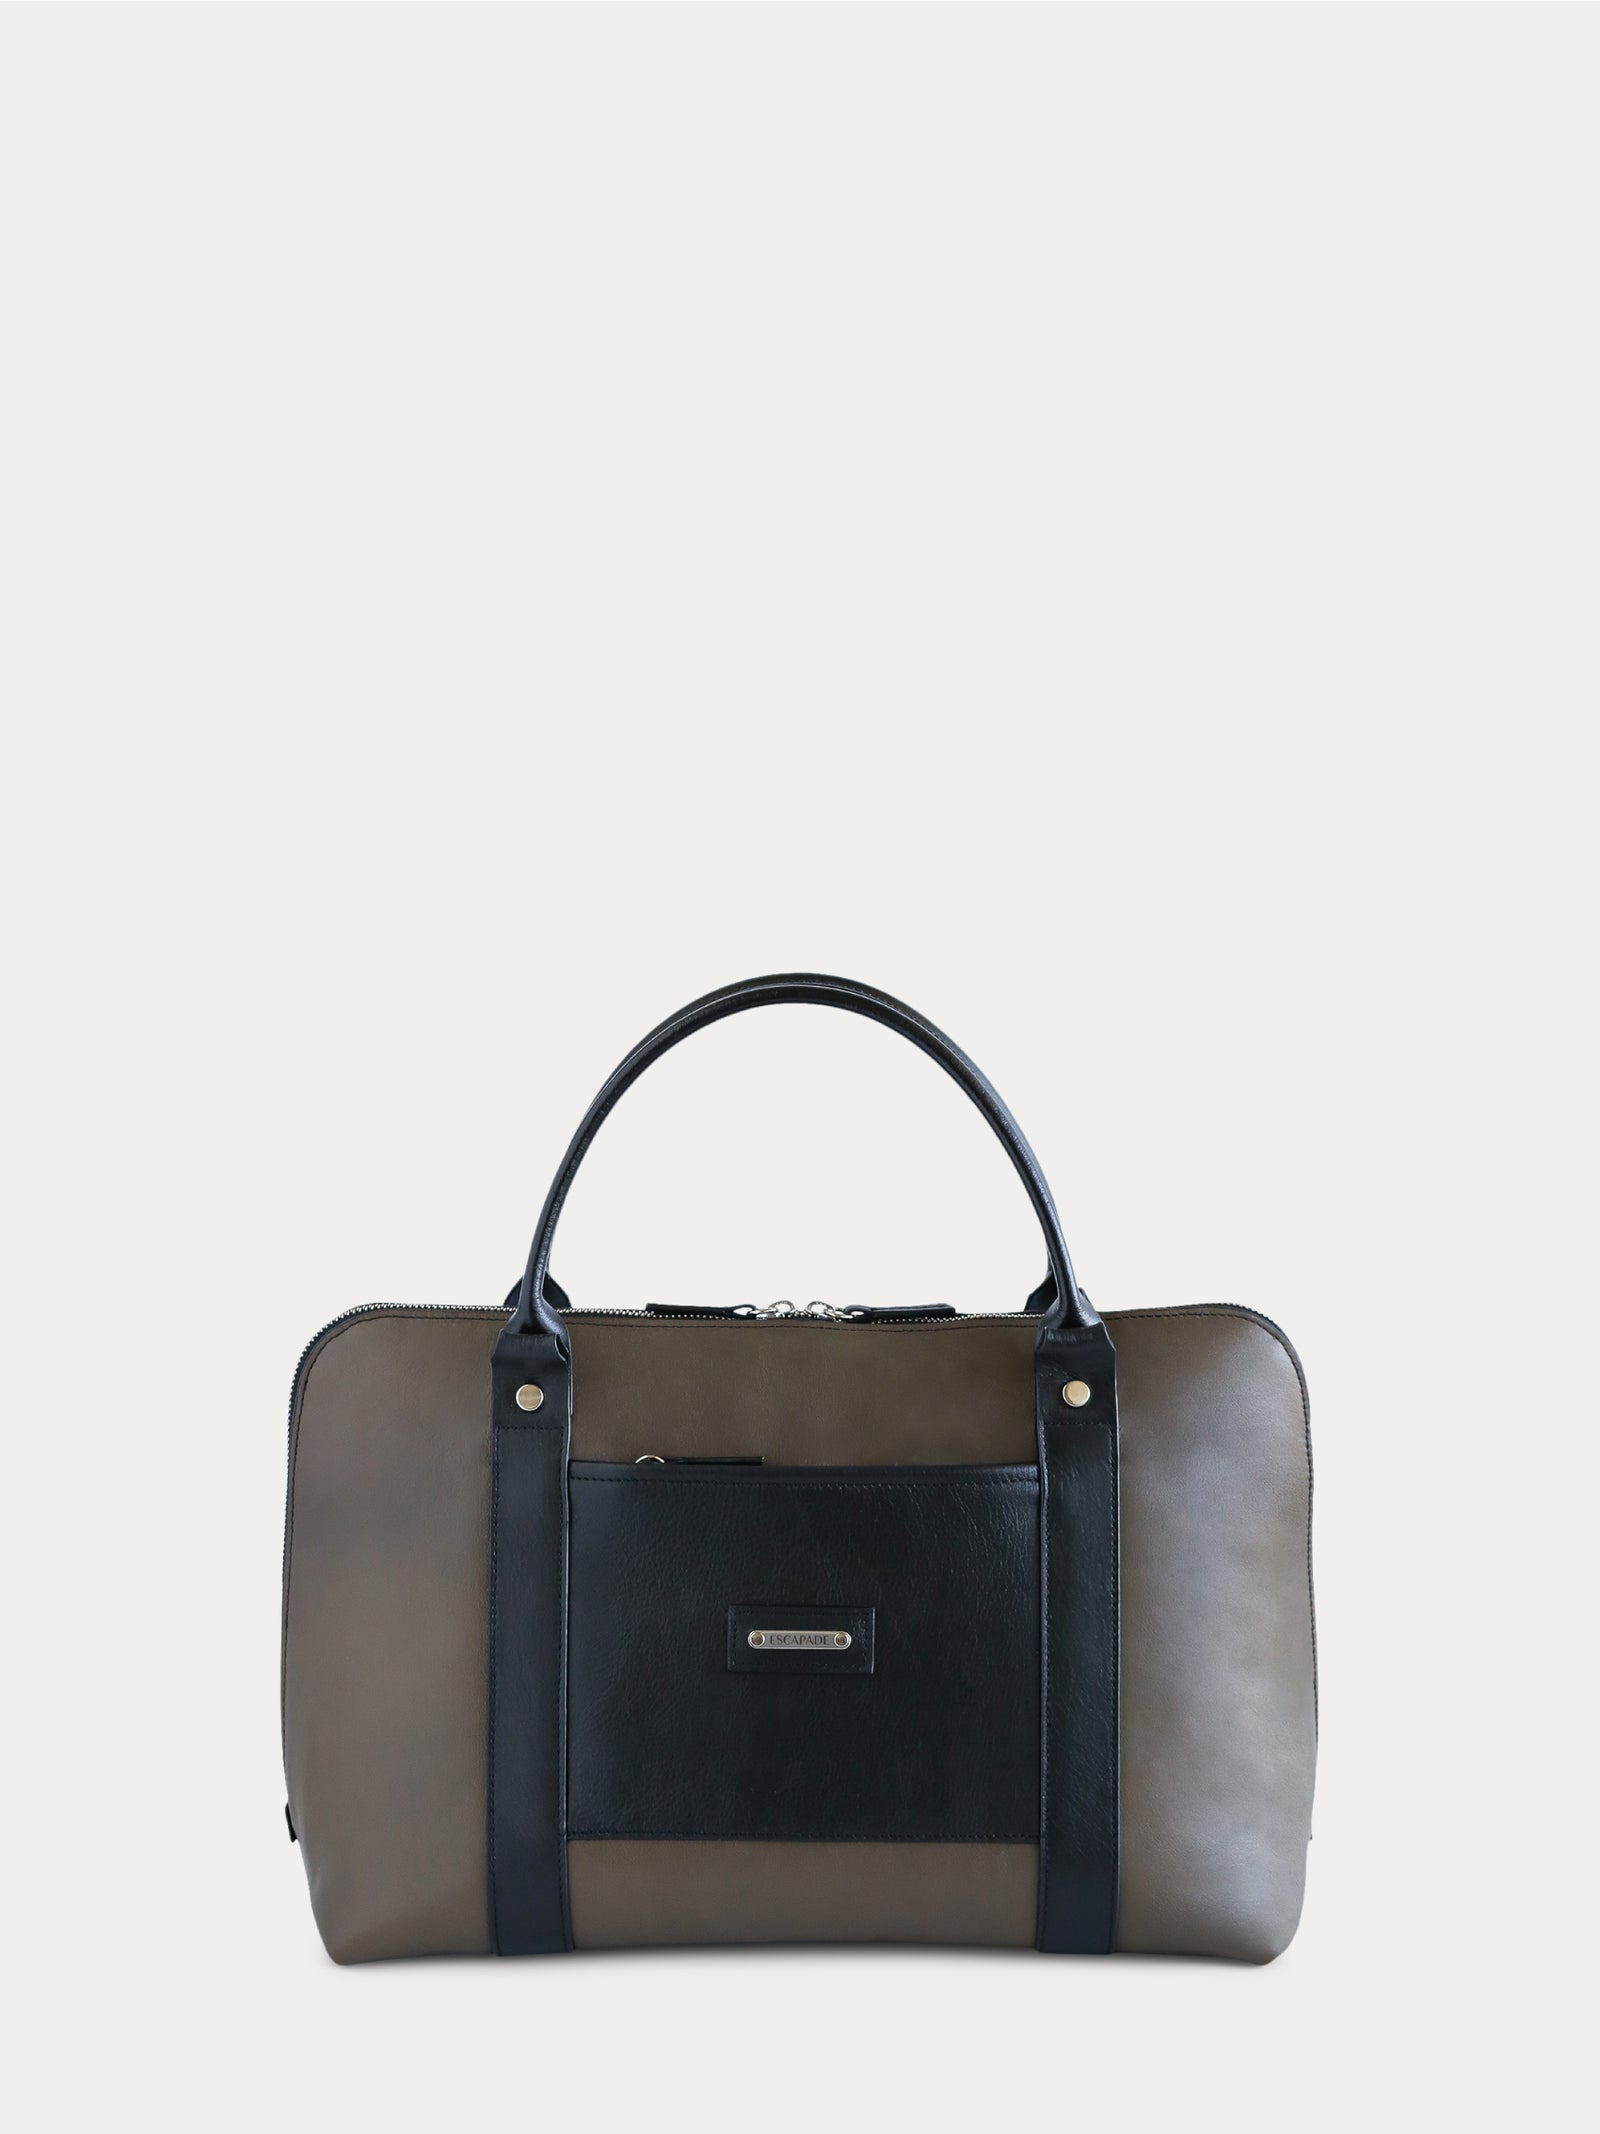 leather duffle bag black and sage